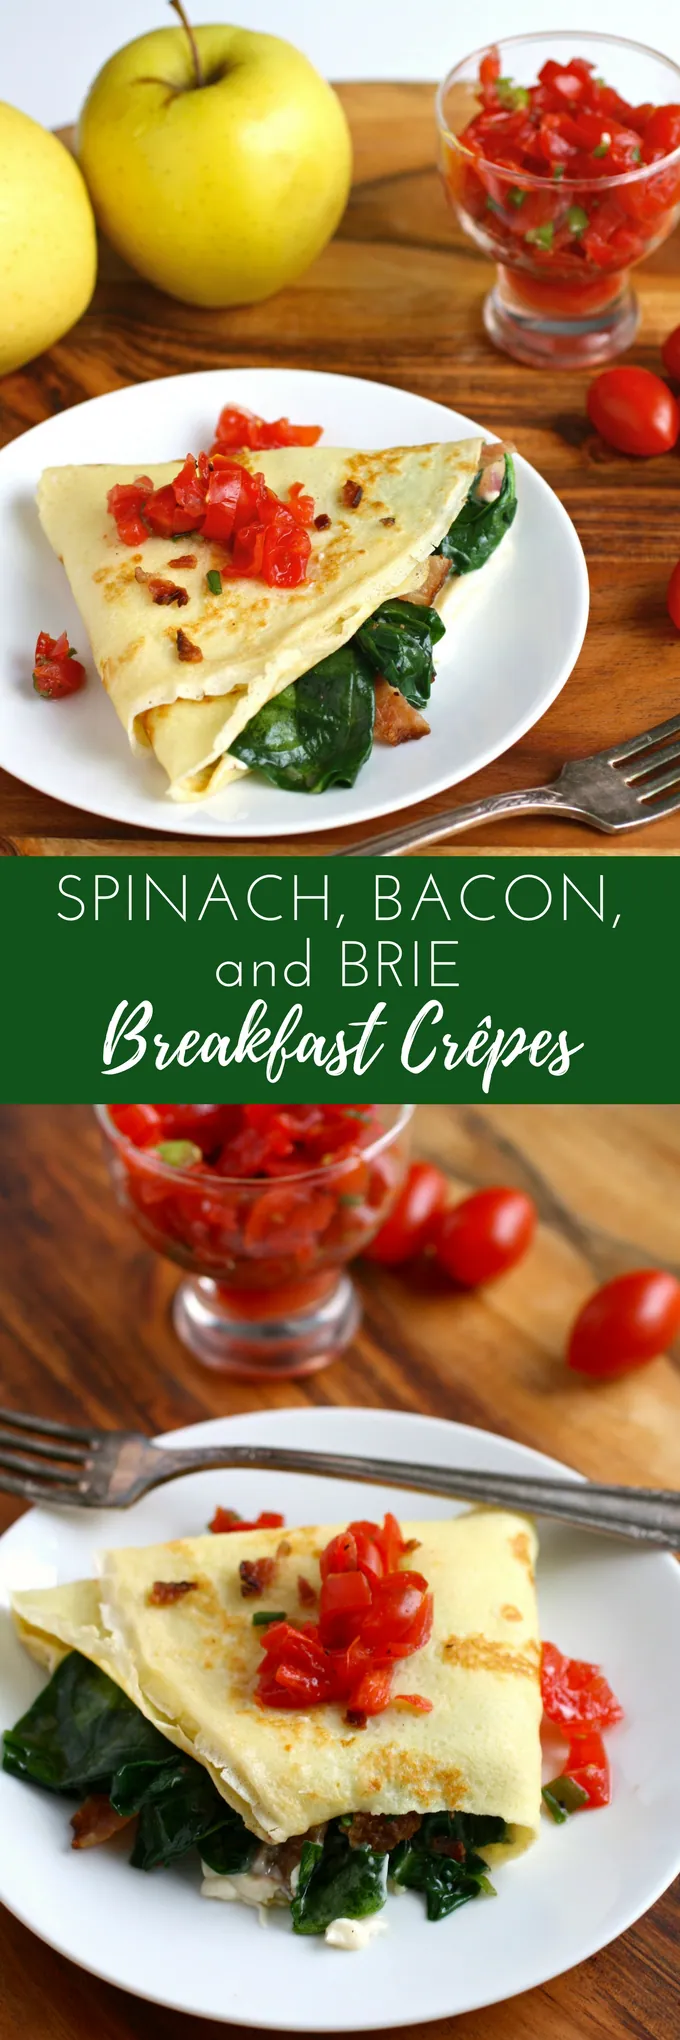 Spinach, Bacon, and Brie Breakfast Crêpes are a treat for breakfast or brunch! These crêpes are so tasty for a special breakfast!